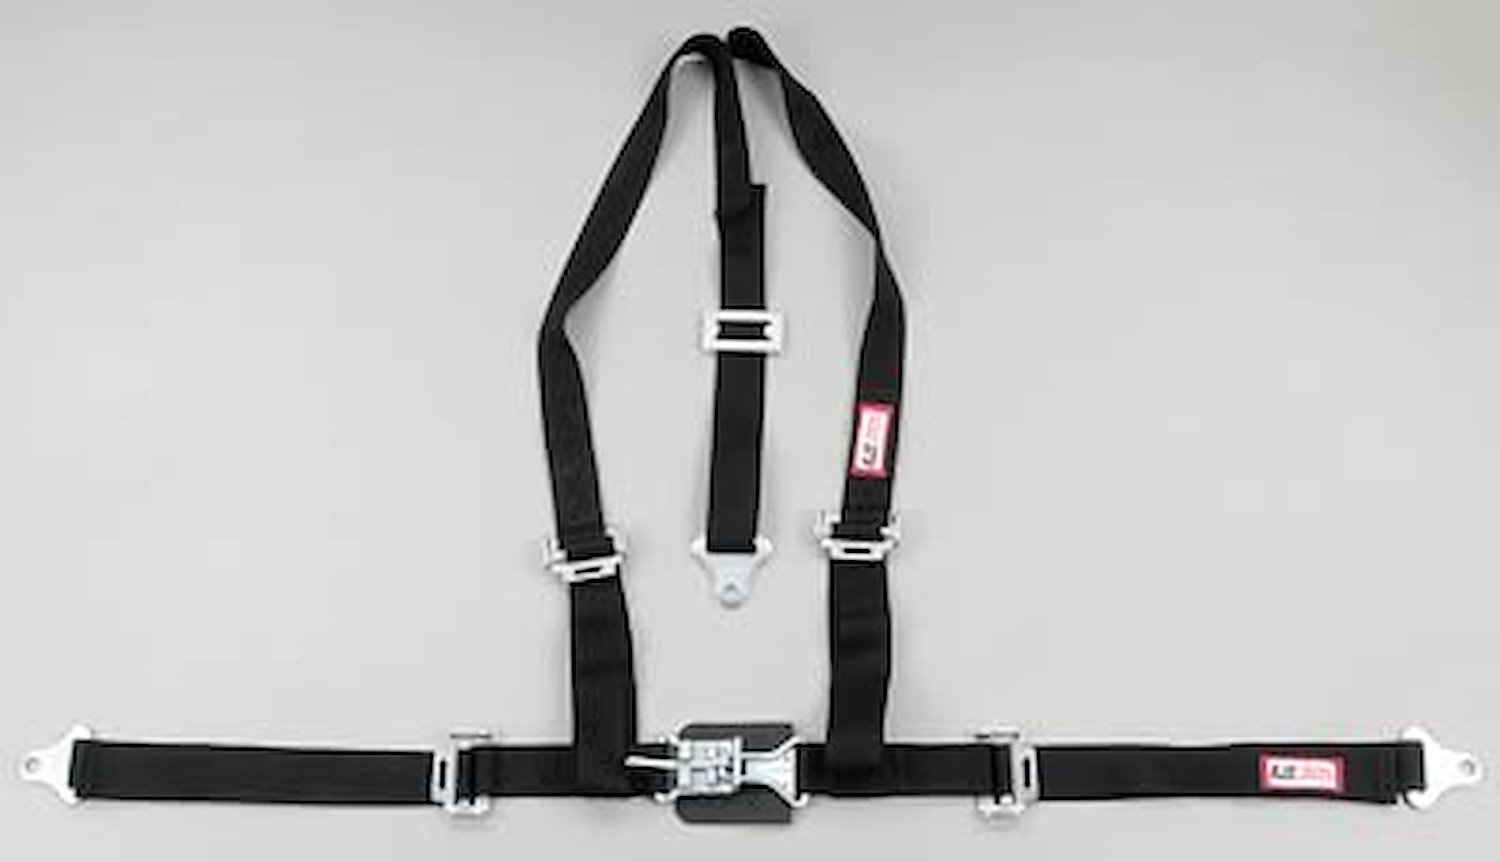 NON-SFI L&L HARNESS 3 PULL DOWN Lap Belt BOLT SEWN IN 2 S.H. Y FLOOR Mount w/STERNUM STRAP WRAP/BOLT RED